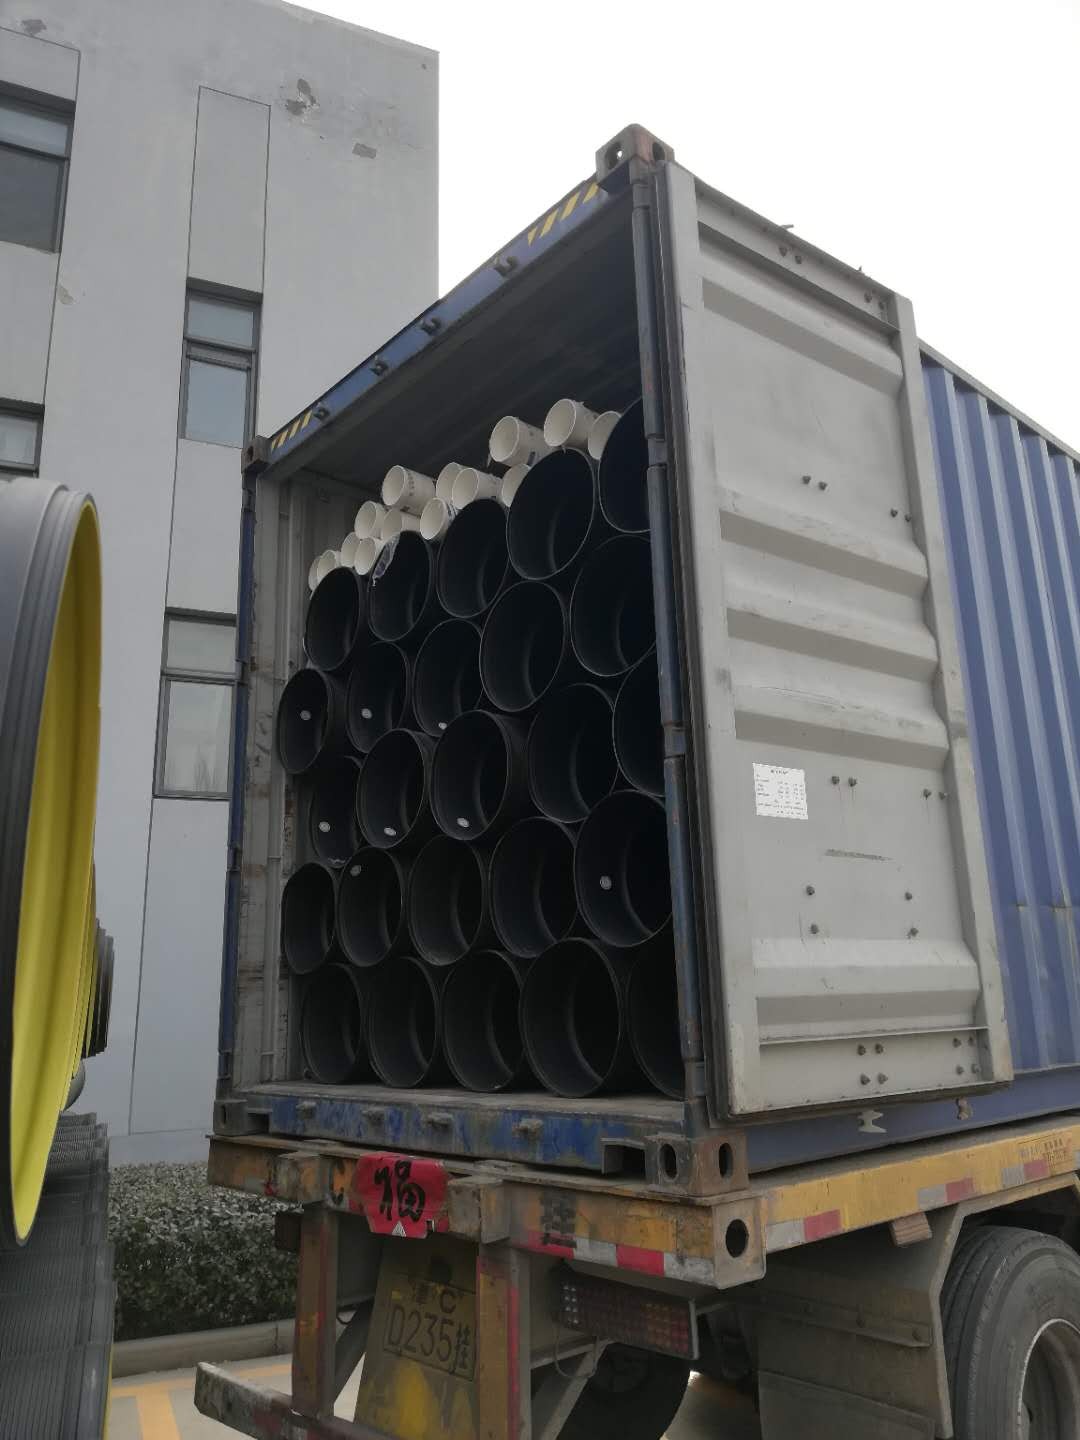 HDPE Double Wall Corrugated Pipe PE draiange pipe Manufacturers, HDPE Double Wall Corrugated Pipe PE draiange pipe Factory, Supply HDPE Double Wall Corrugated Pipe PE draiange pipe